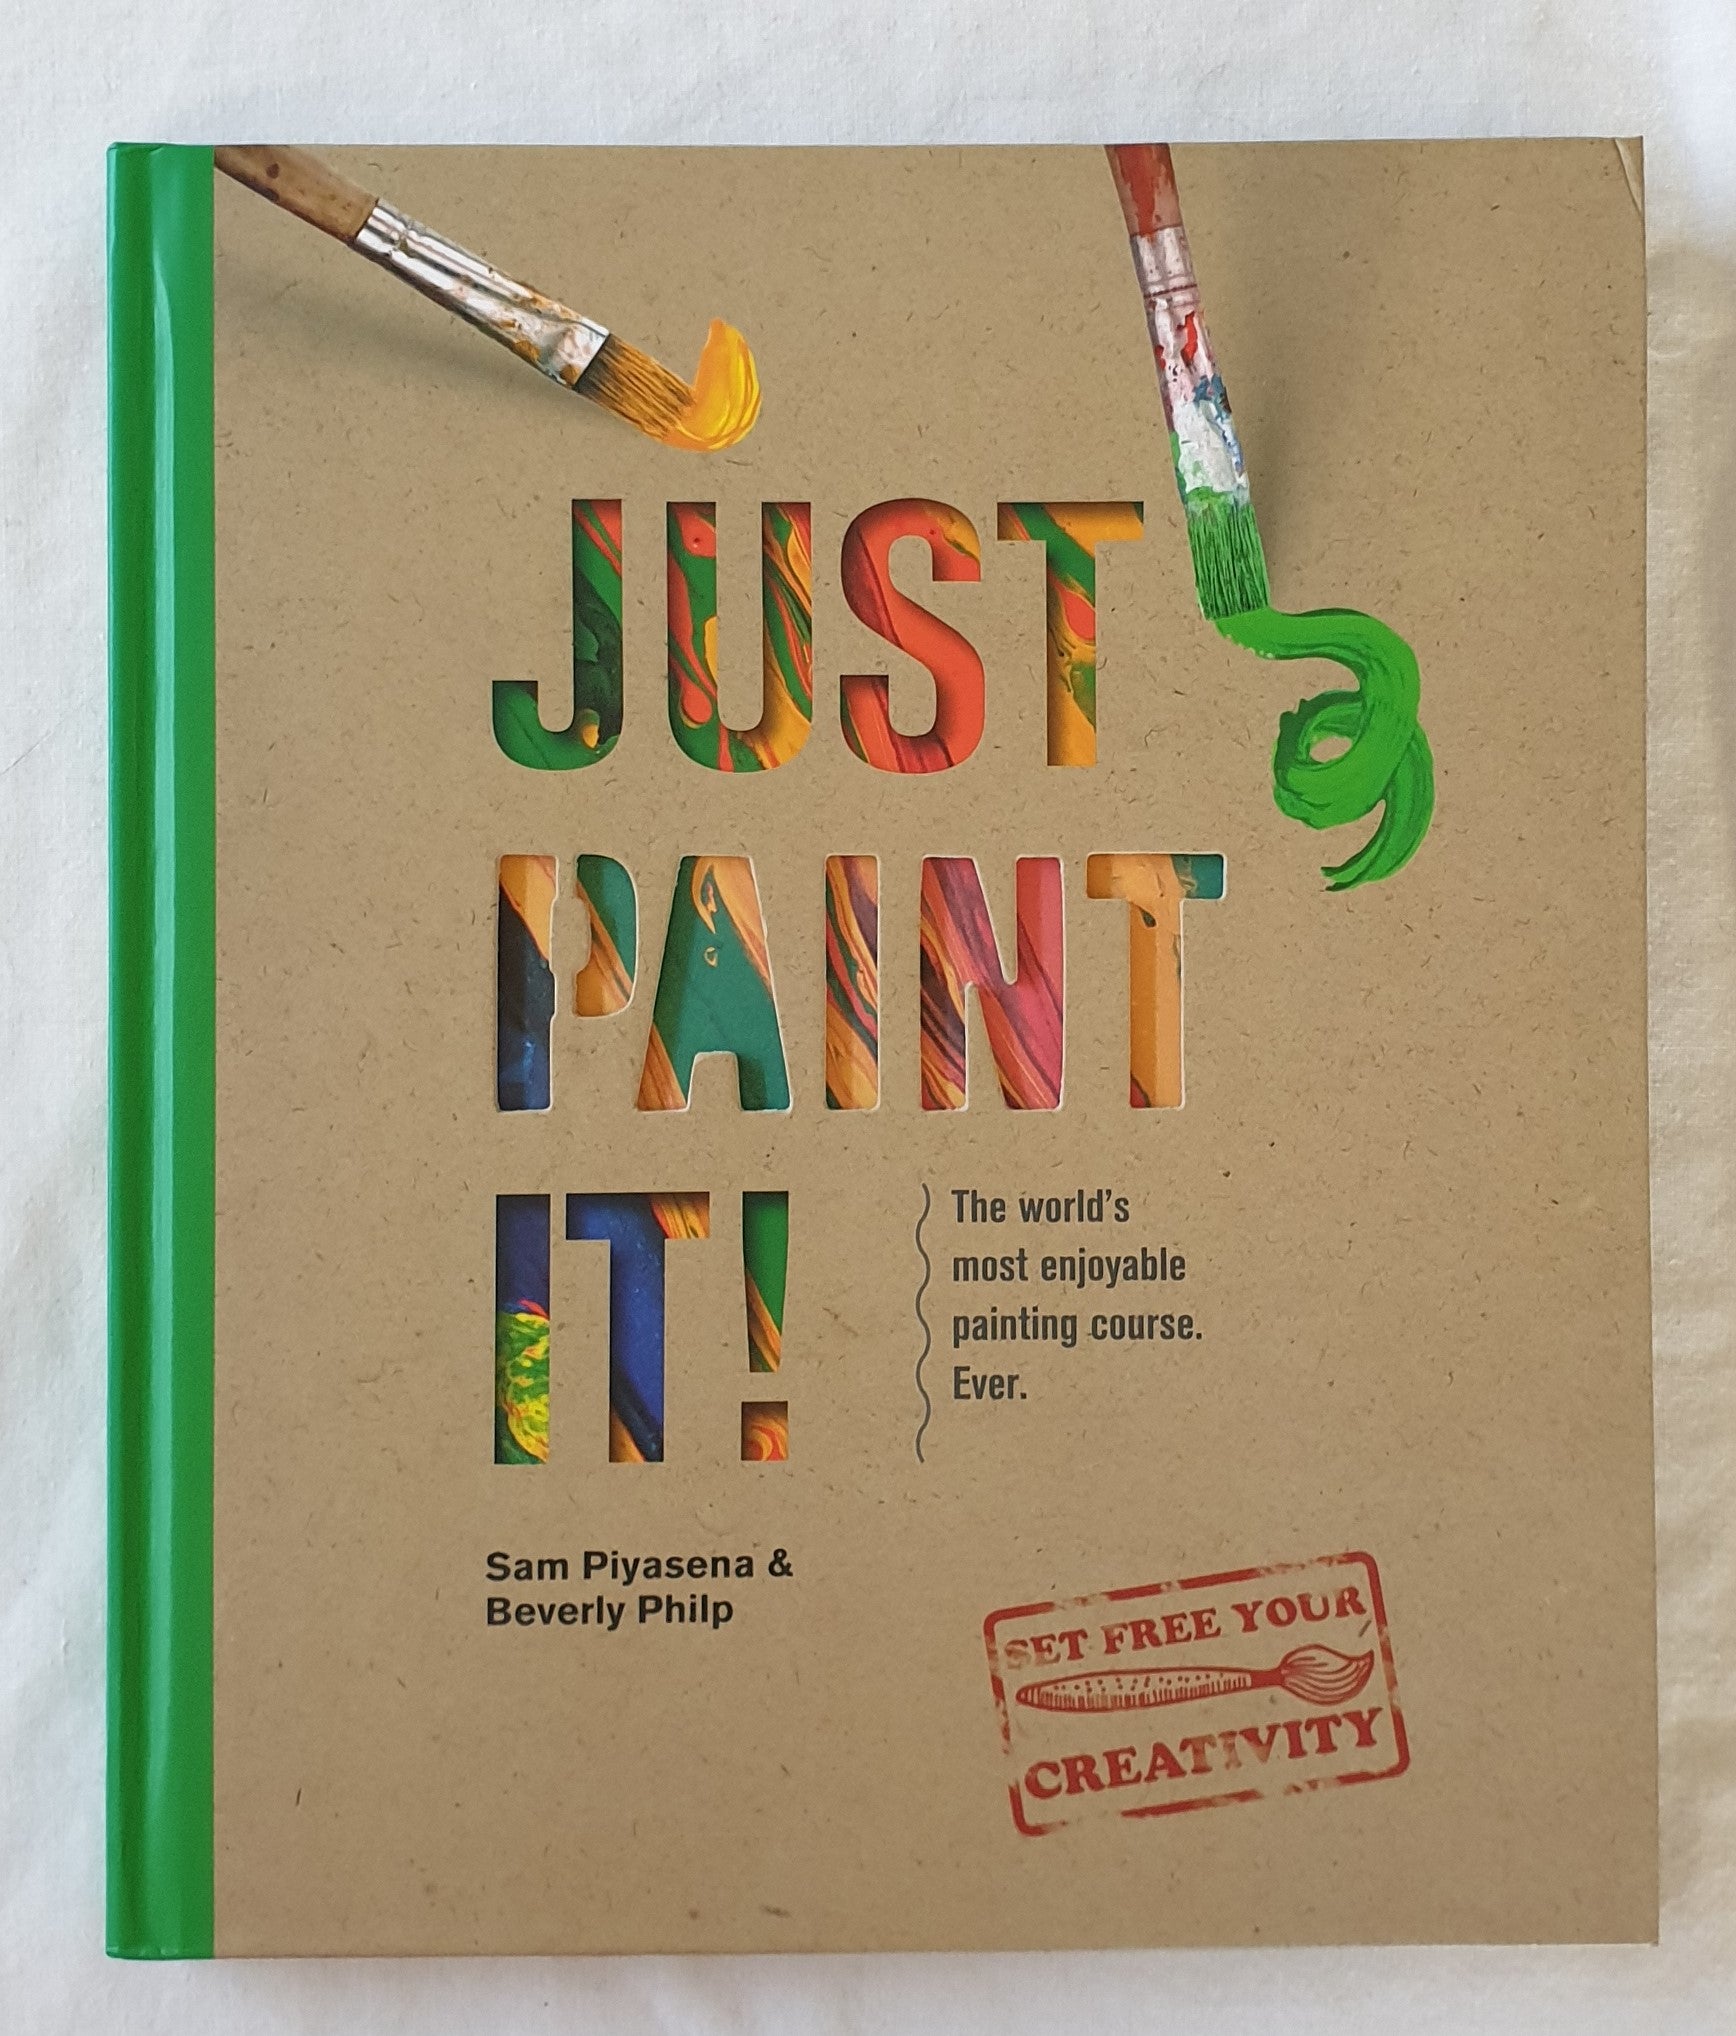 Just Paint It! by Sam Piyasena and Beverly Philp